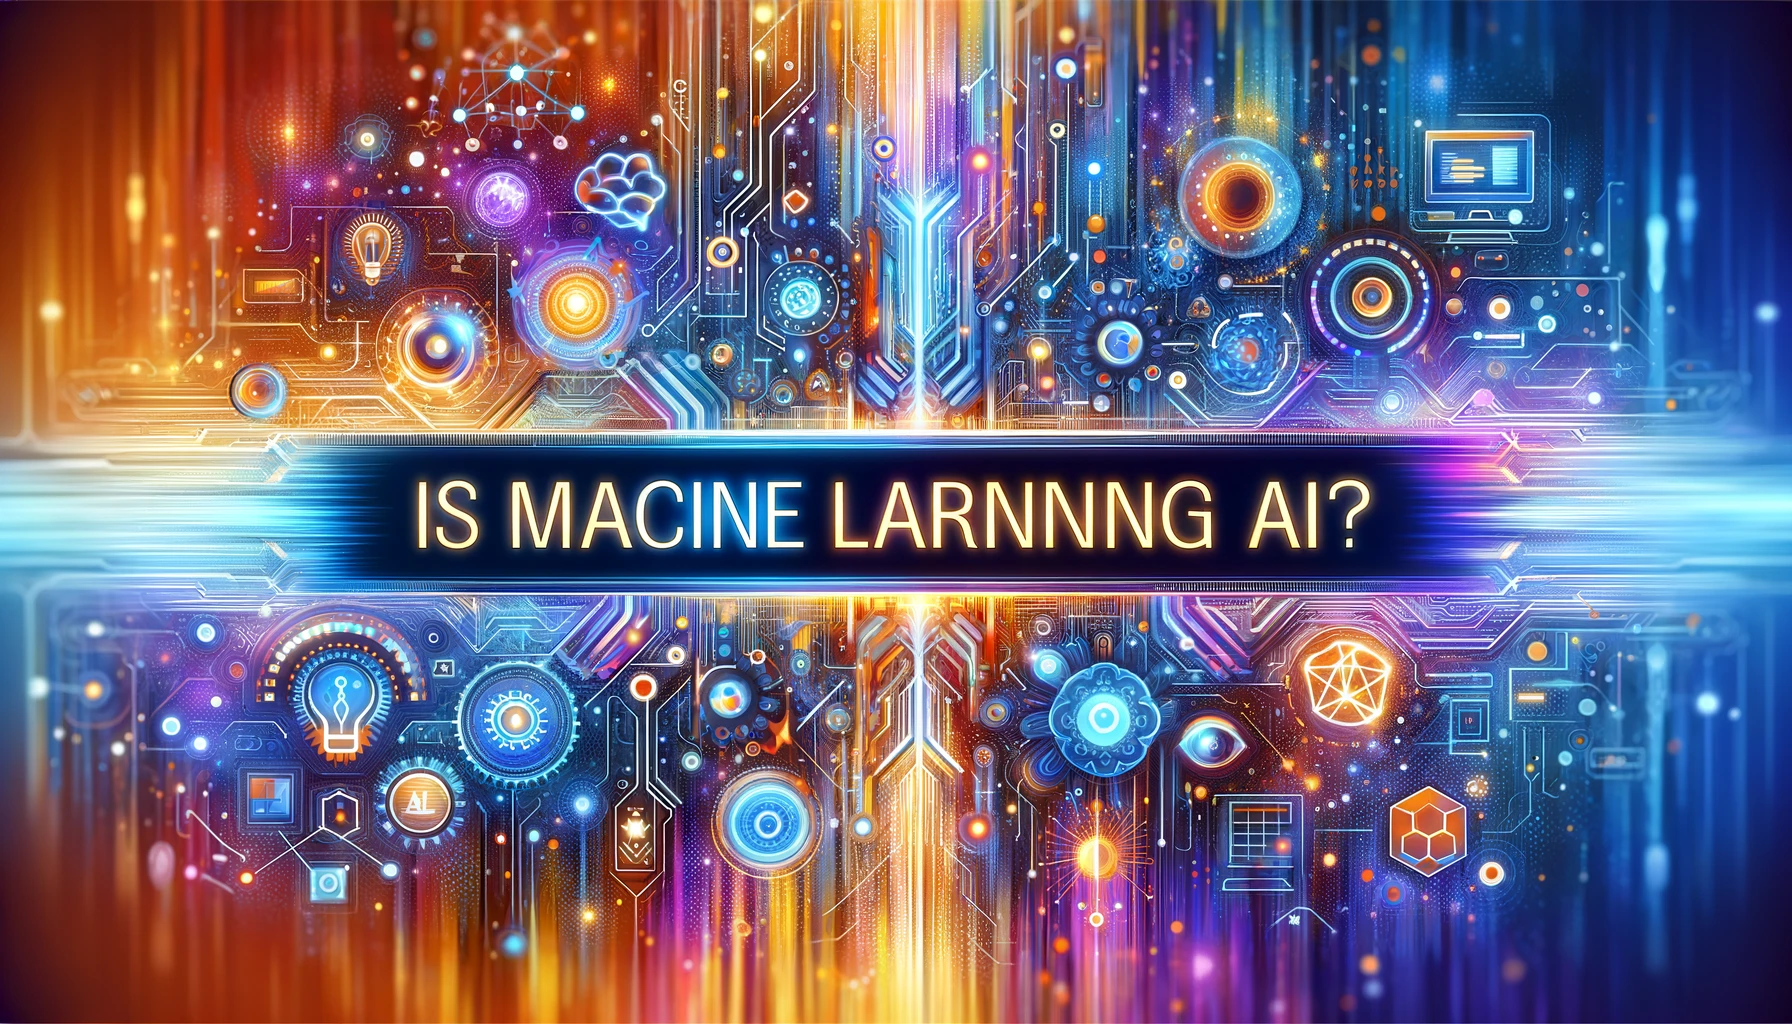 featured image of an artical on Machine Learning AI